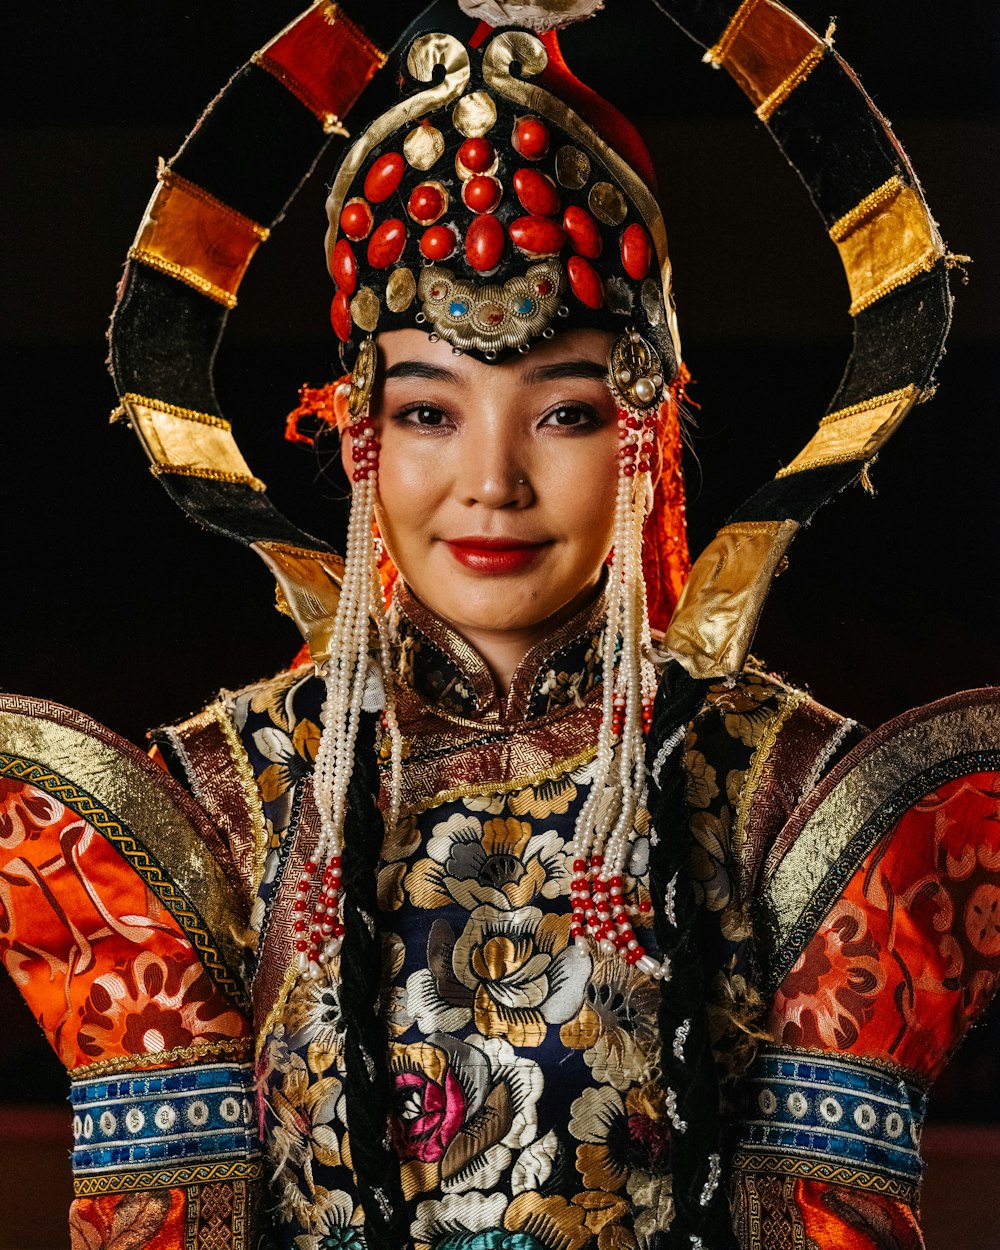 a woman dressed in a costume and headdress